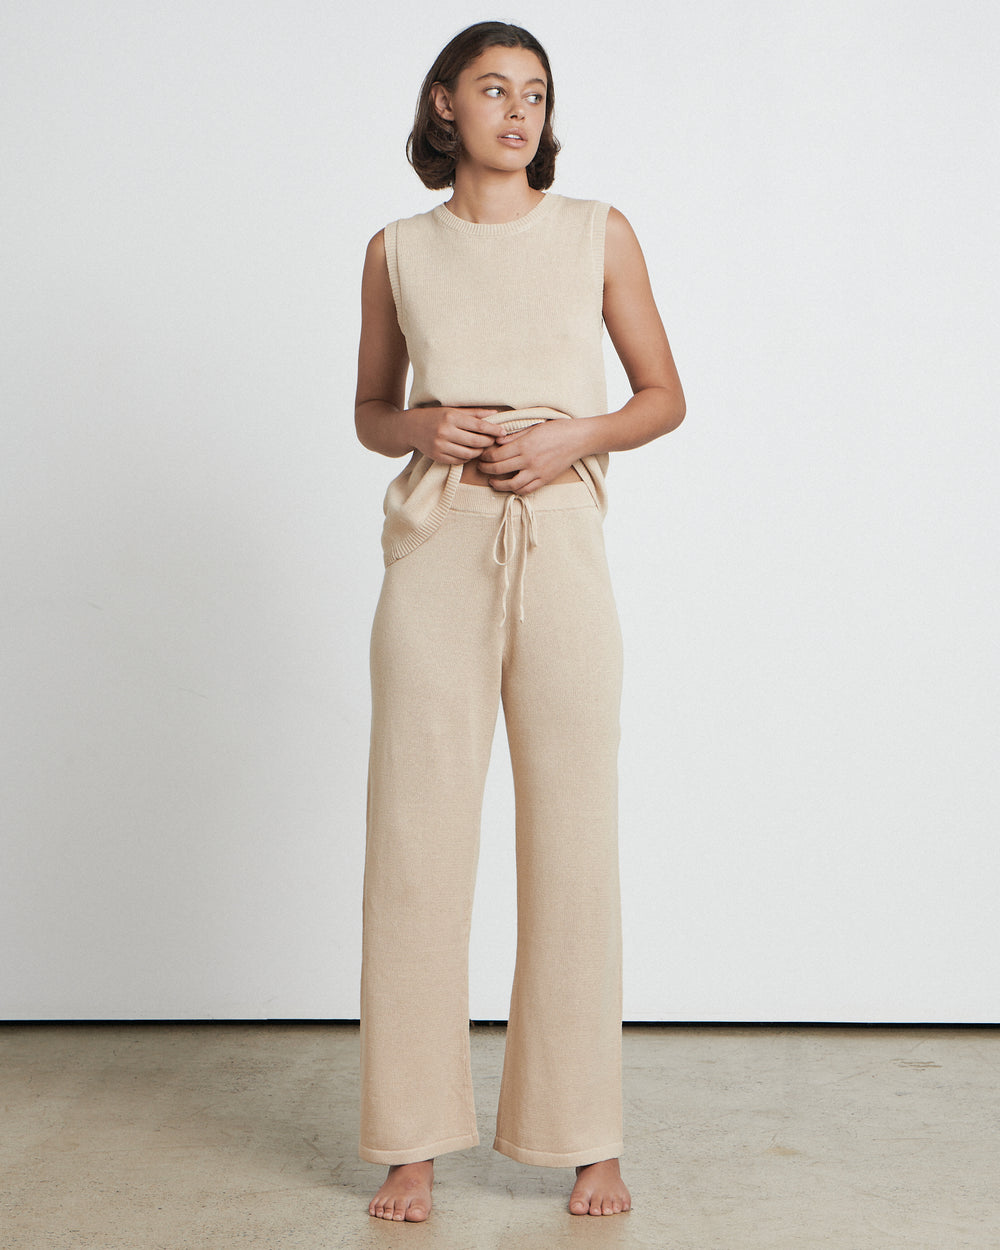 The Knitted Lounge Pant